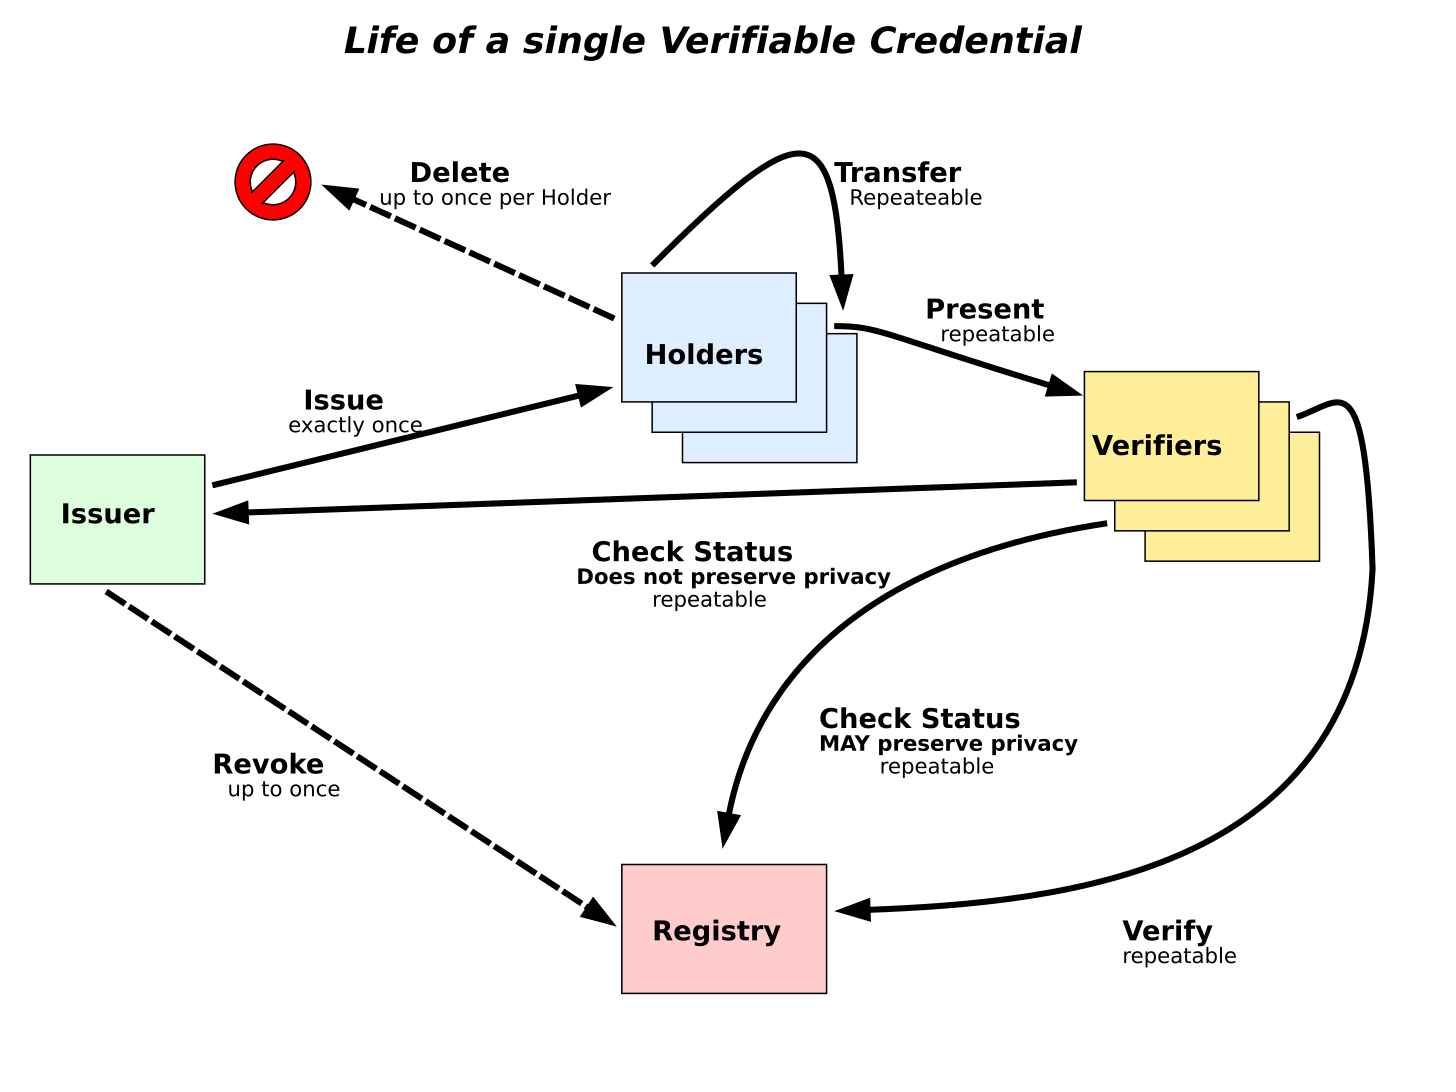 diagram showing how
         credentials flow from issuer to holder, and optionally
         from one holder to another; and how
         presentations flow from holder to verifier, where
         all parties can use information from a logical
         verifiable data registry